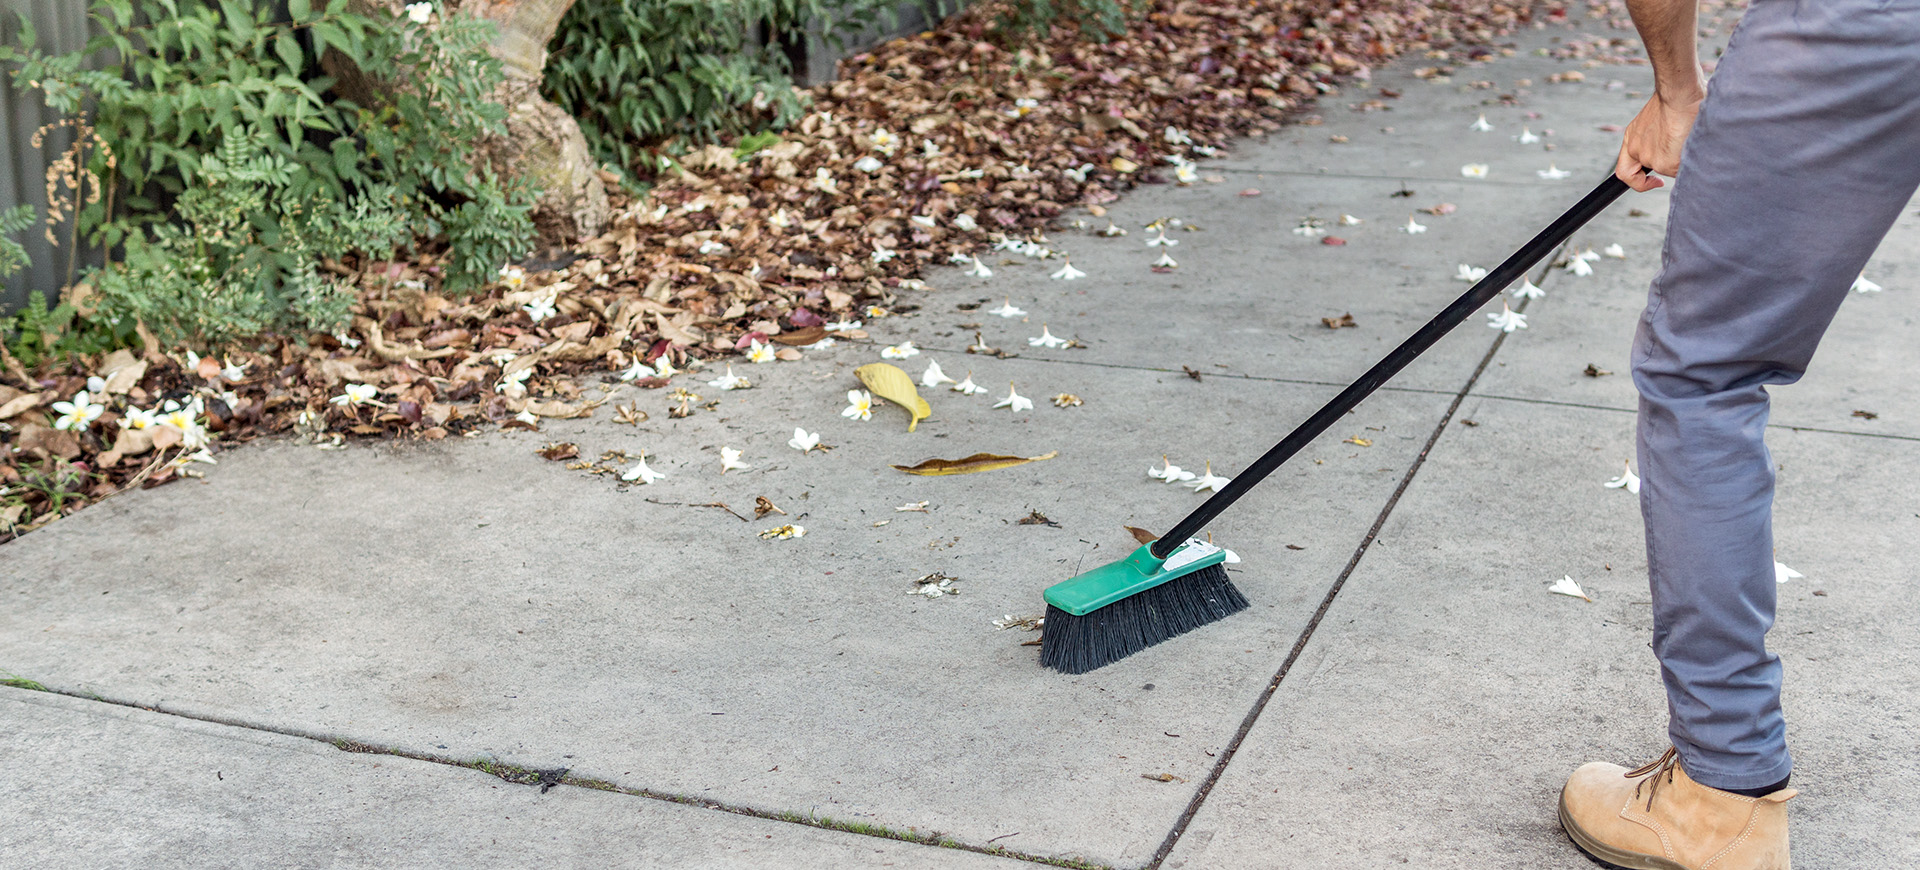 Man sweeping the driveway with a broom